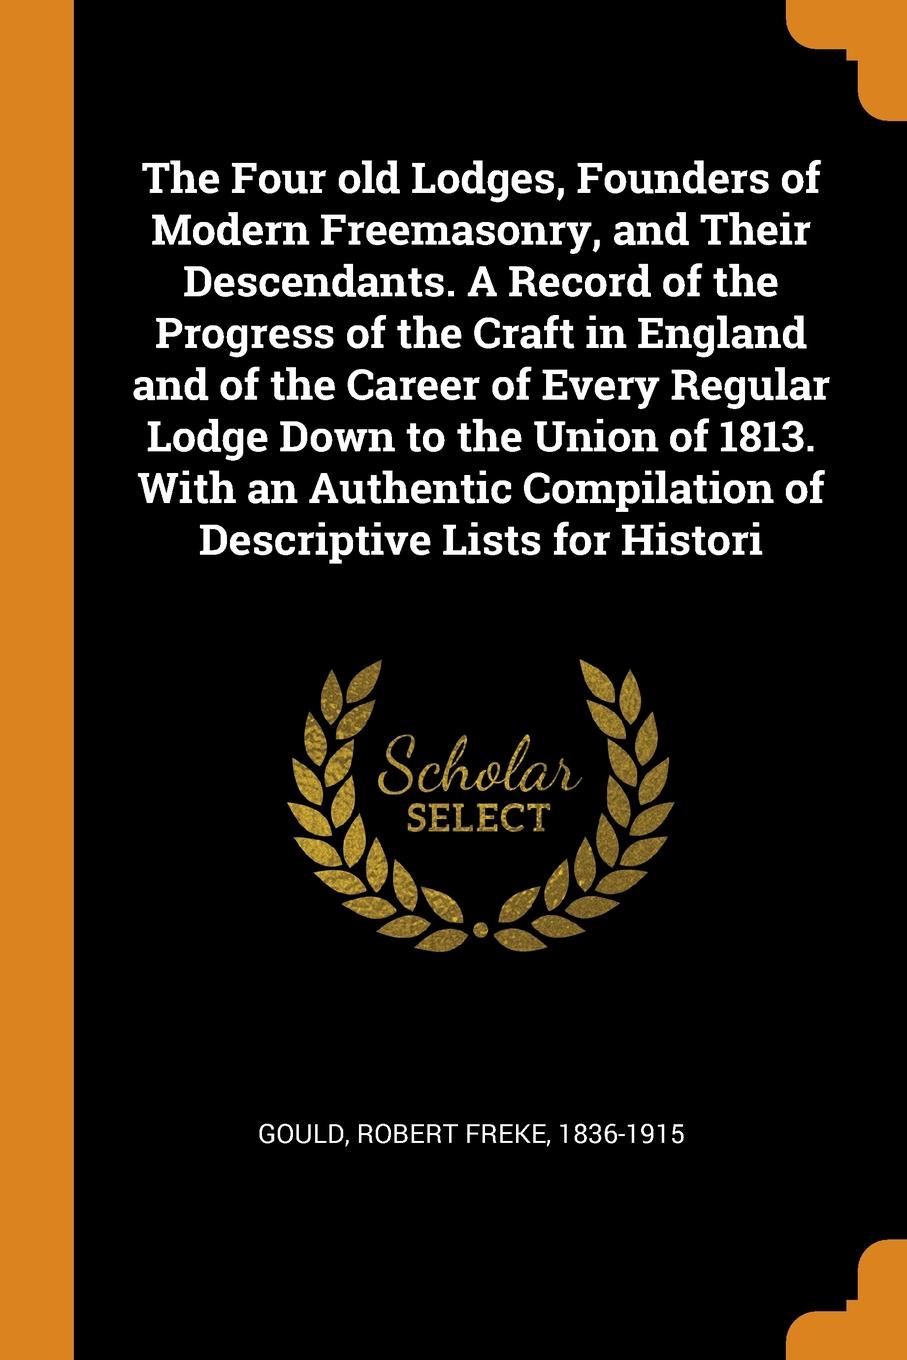 The Four old Lodges, Founders of Modern Freemasonry, and Their Descendants. A Record of the Progress of the Craft in England and of the Career of Every Regular Lodge Down to the Union of 1813. With an Authentic Compilation of Descriptive Lists for...